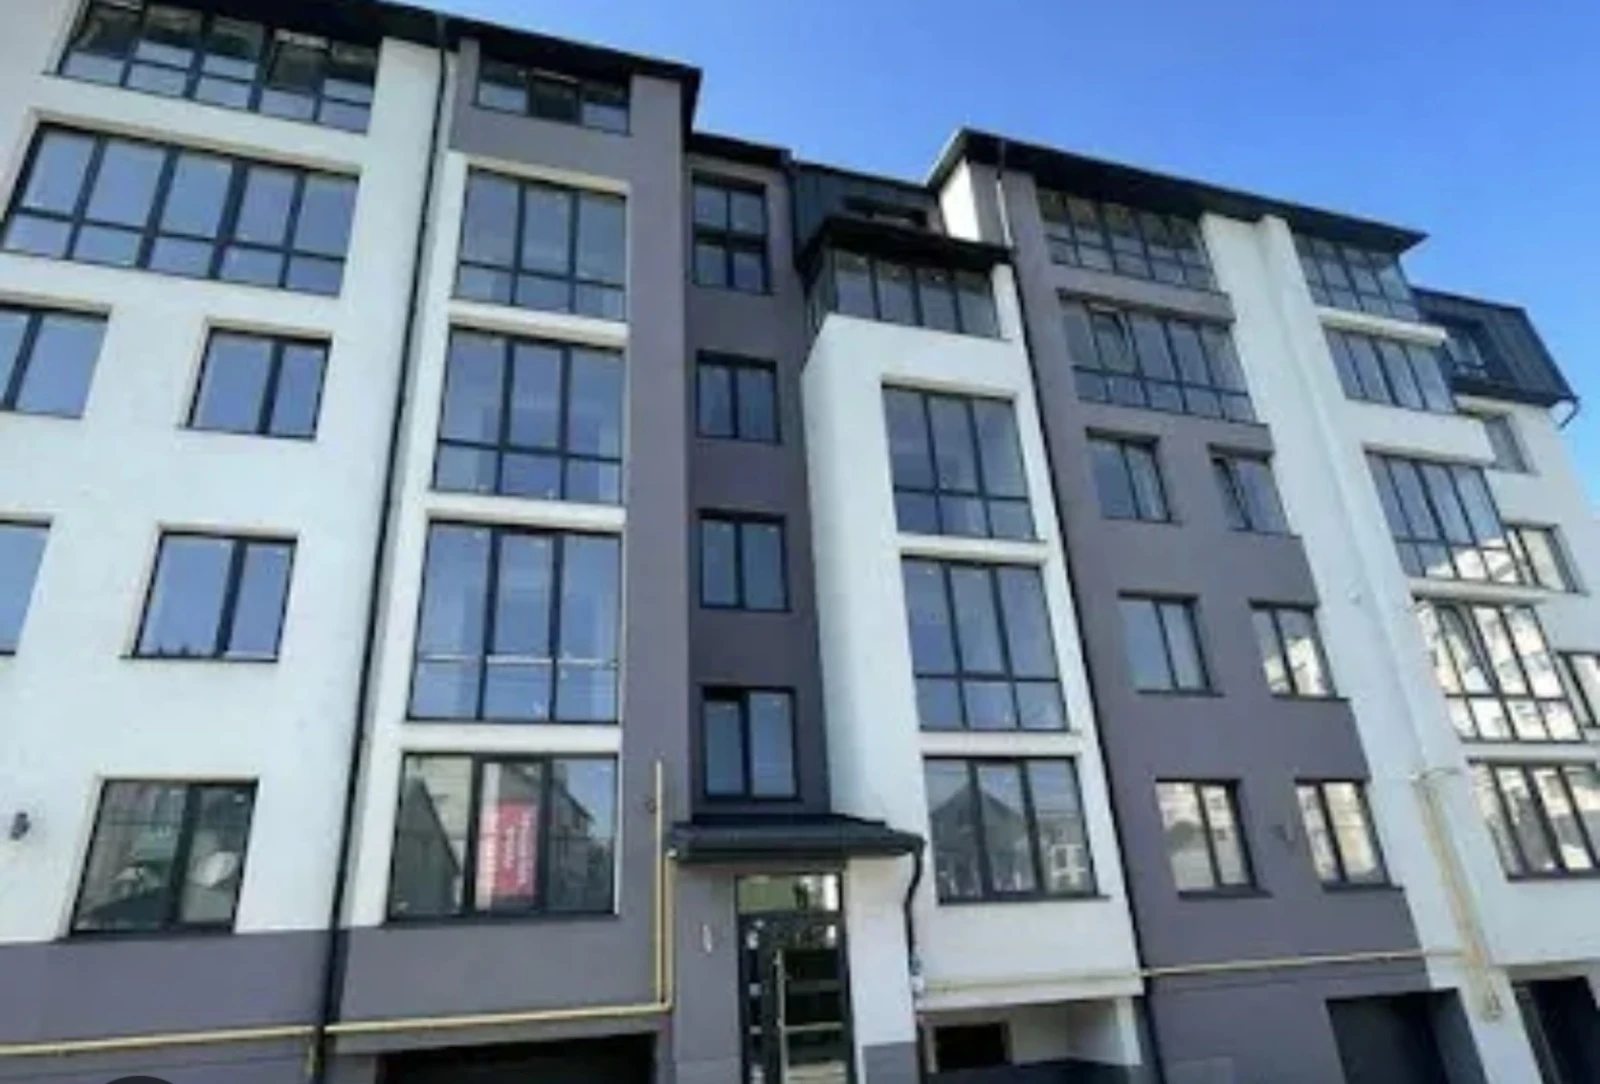 Apartments for sale. 2 rooms, 49 m², 3rd floor/4 floors. Staryy park, Ternopil. 